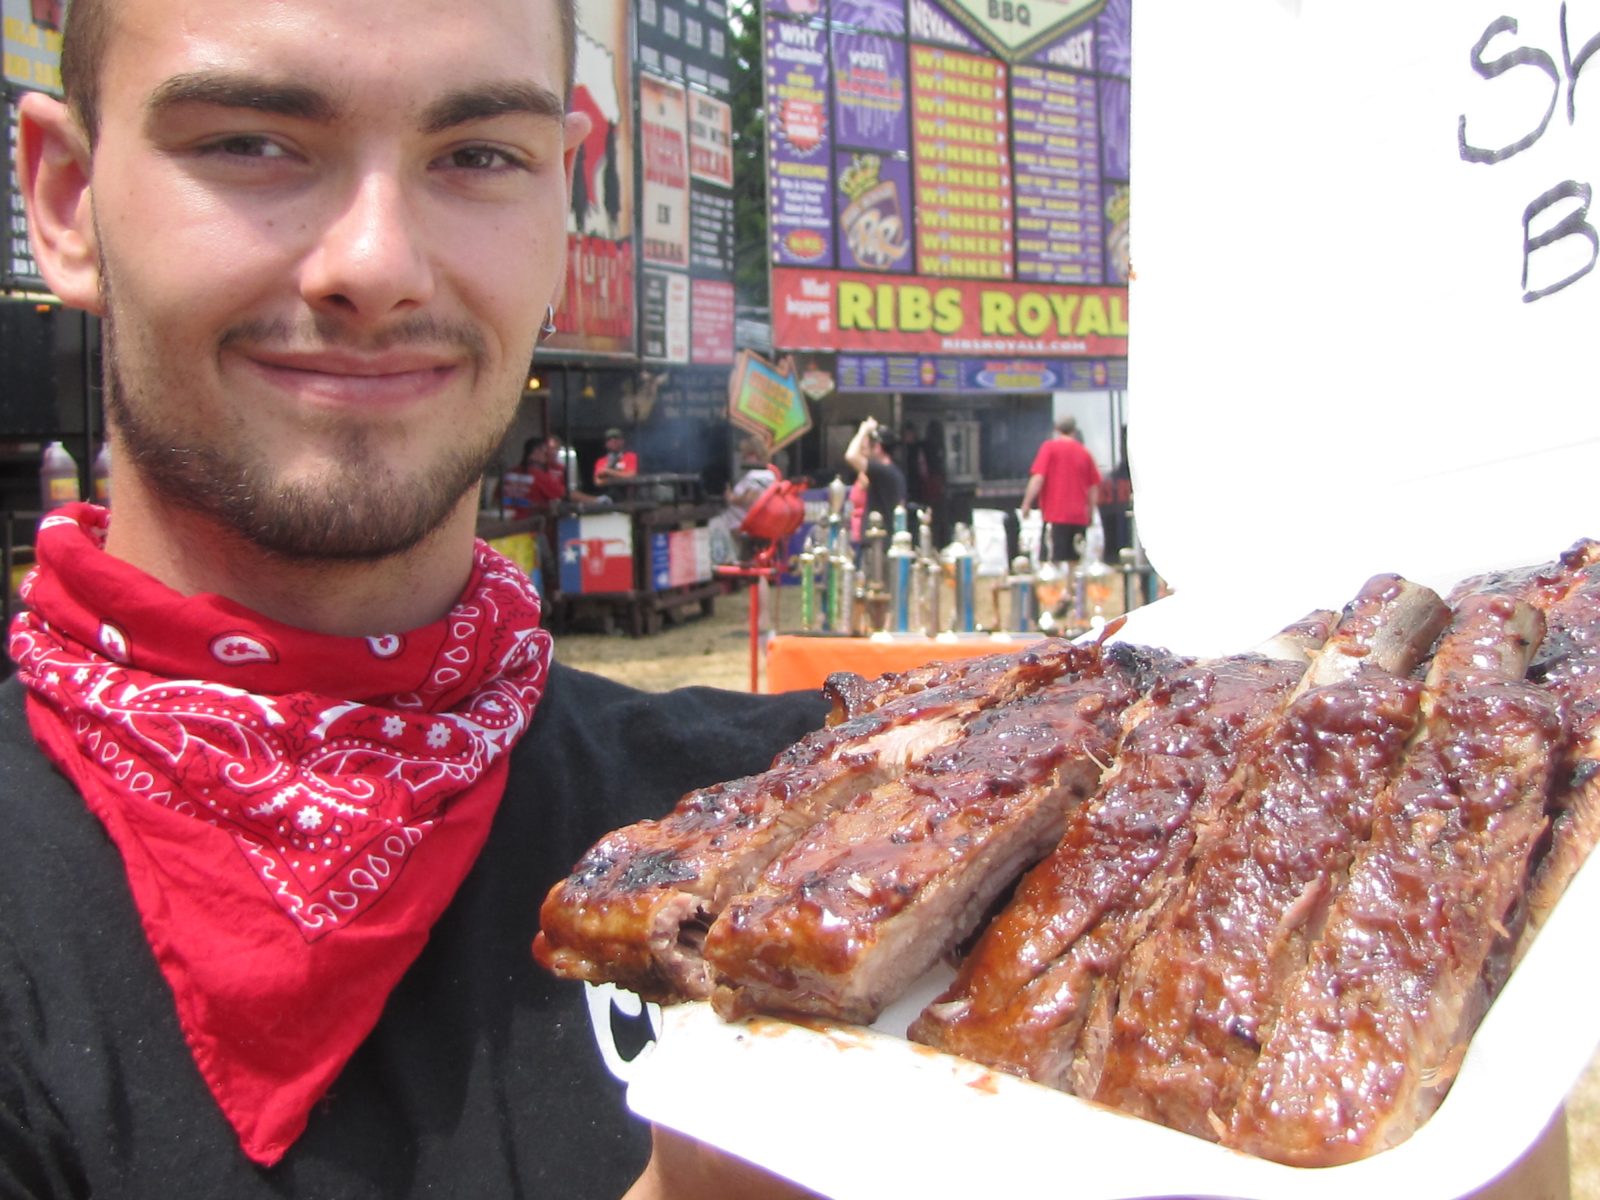 Ribfest sets its entertainment lineup for summer event